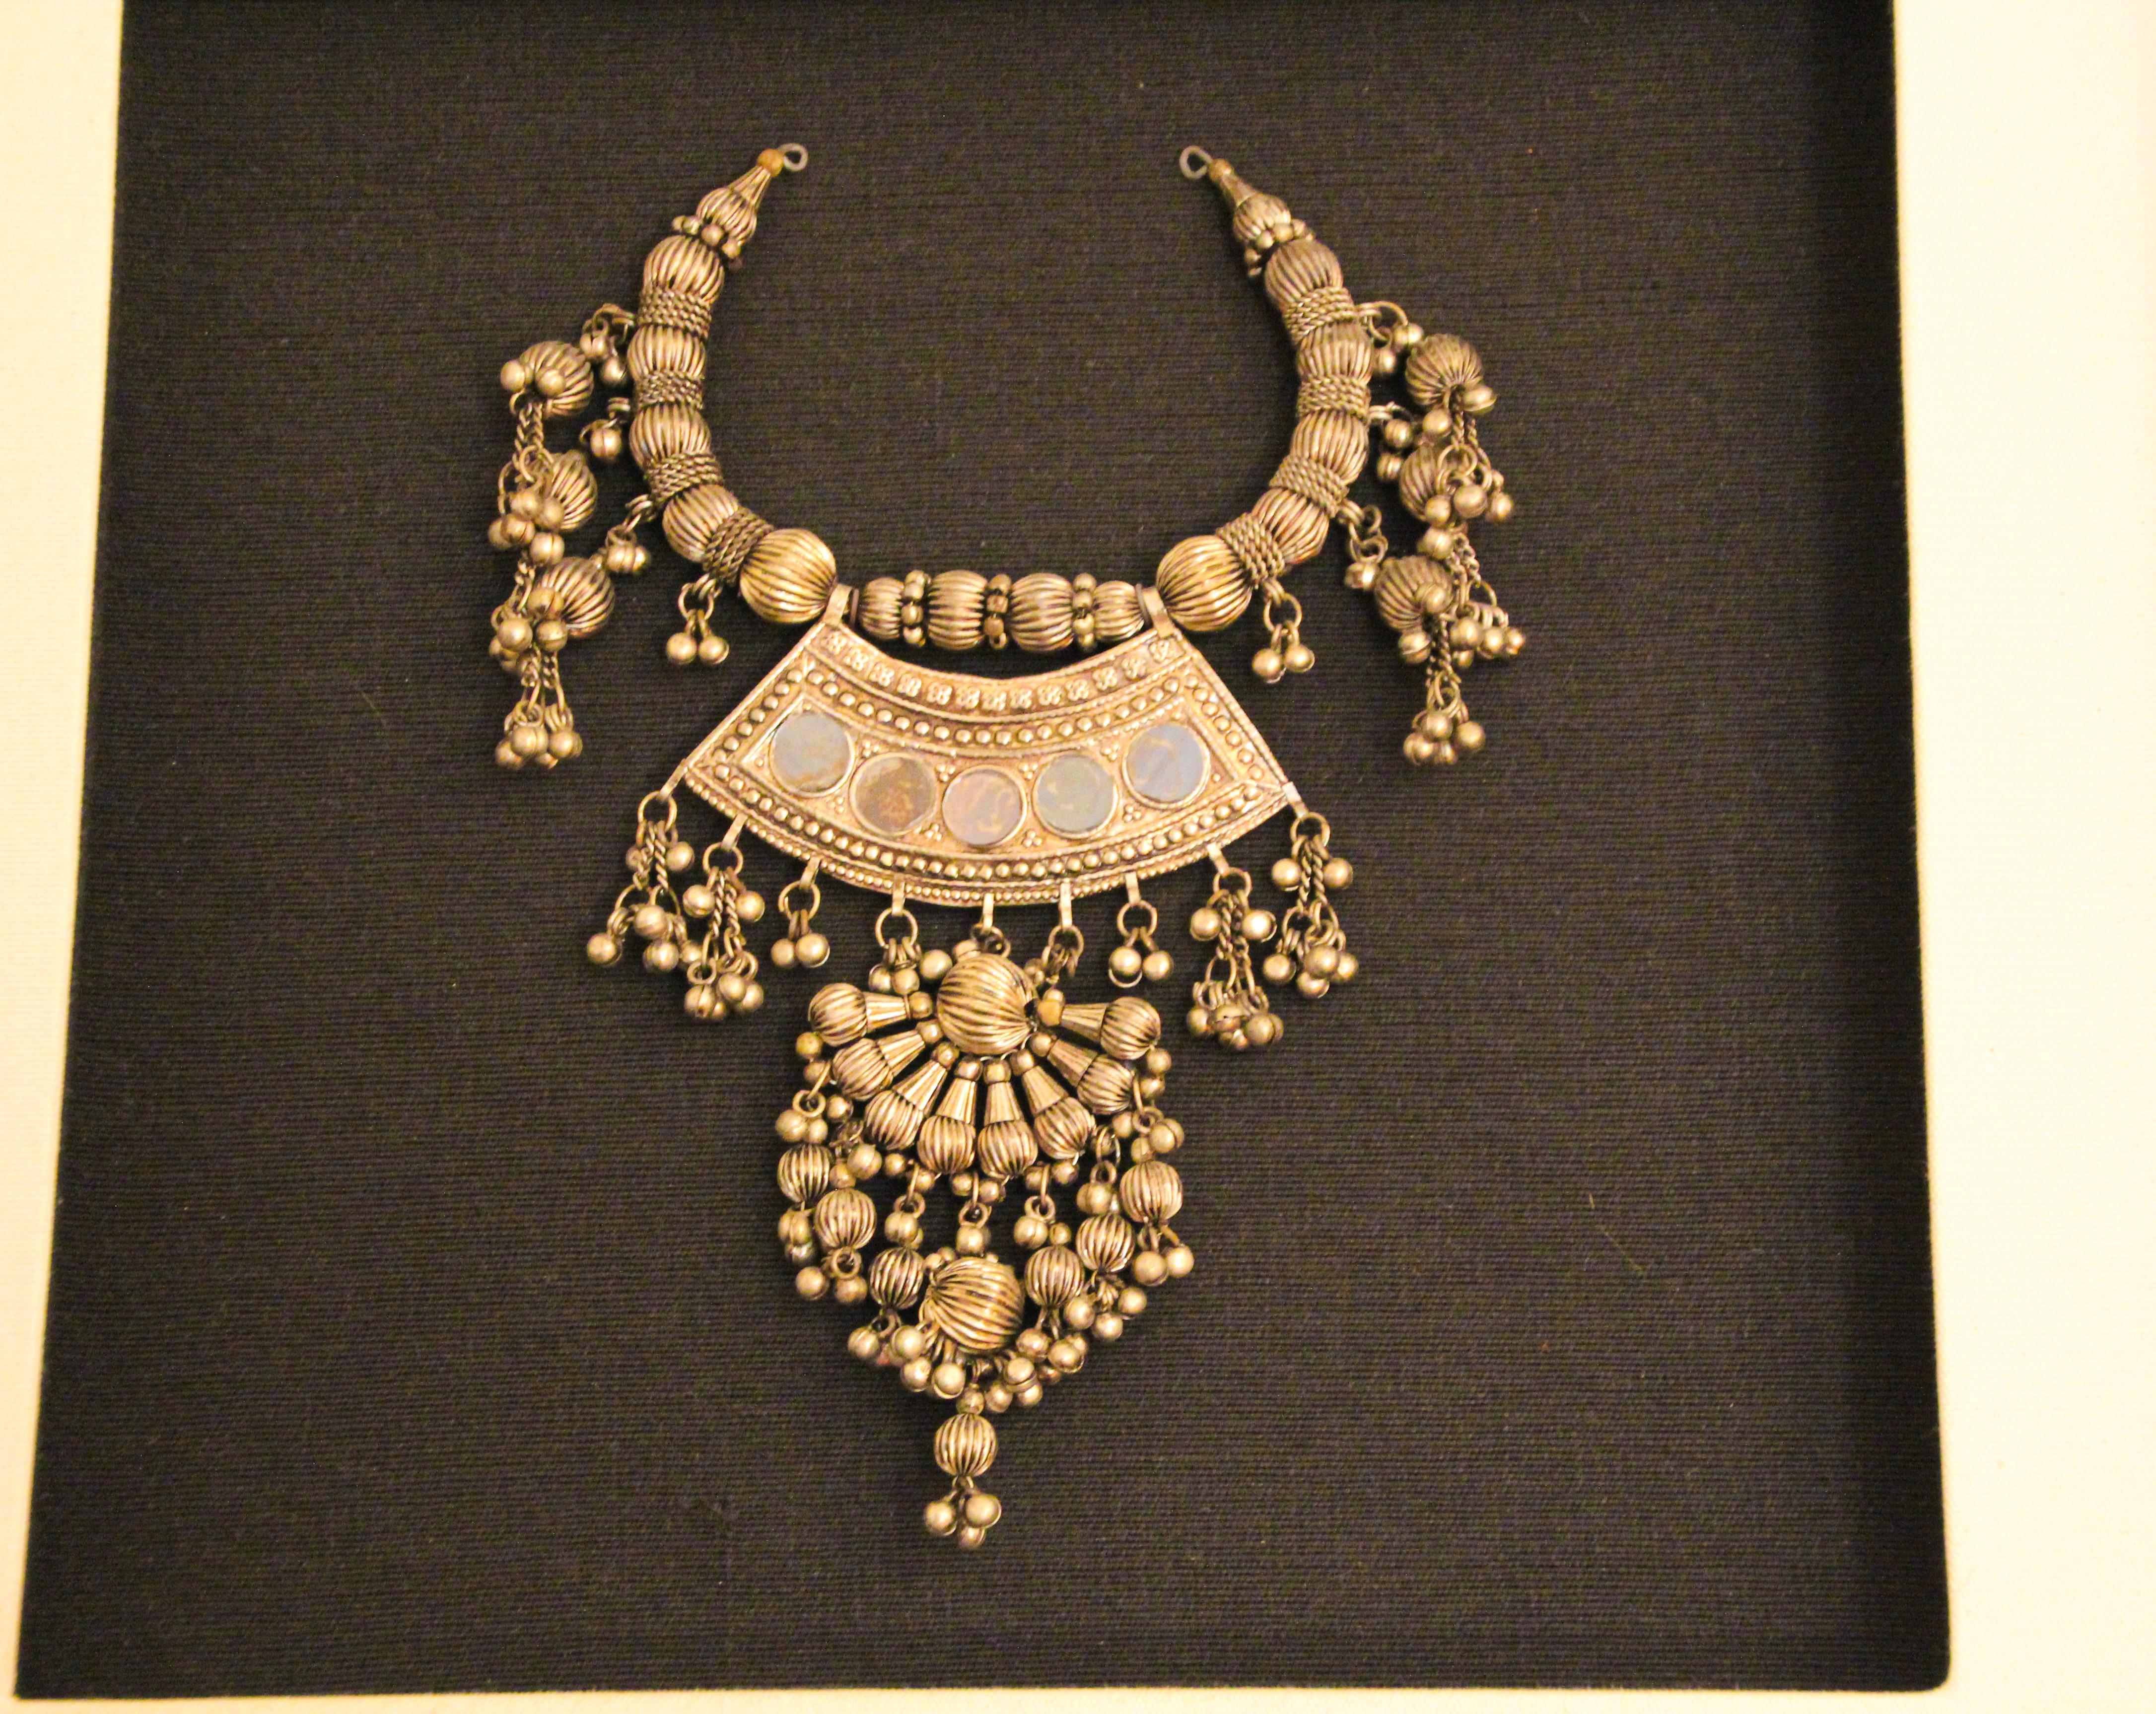 Hand-Crafted Vintage Collectible Jewelry Ethnic Indian Necklace Framed For Sale